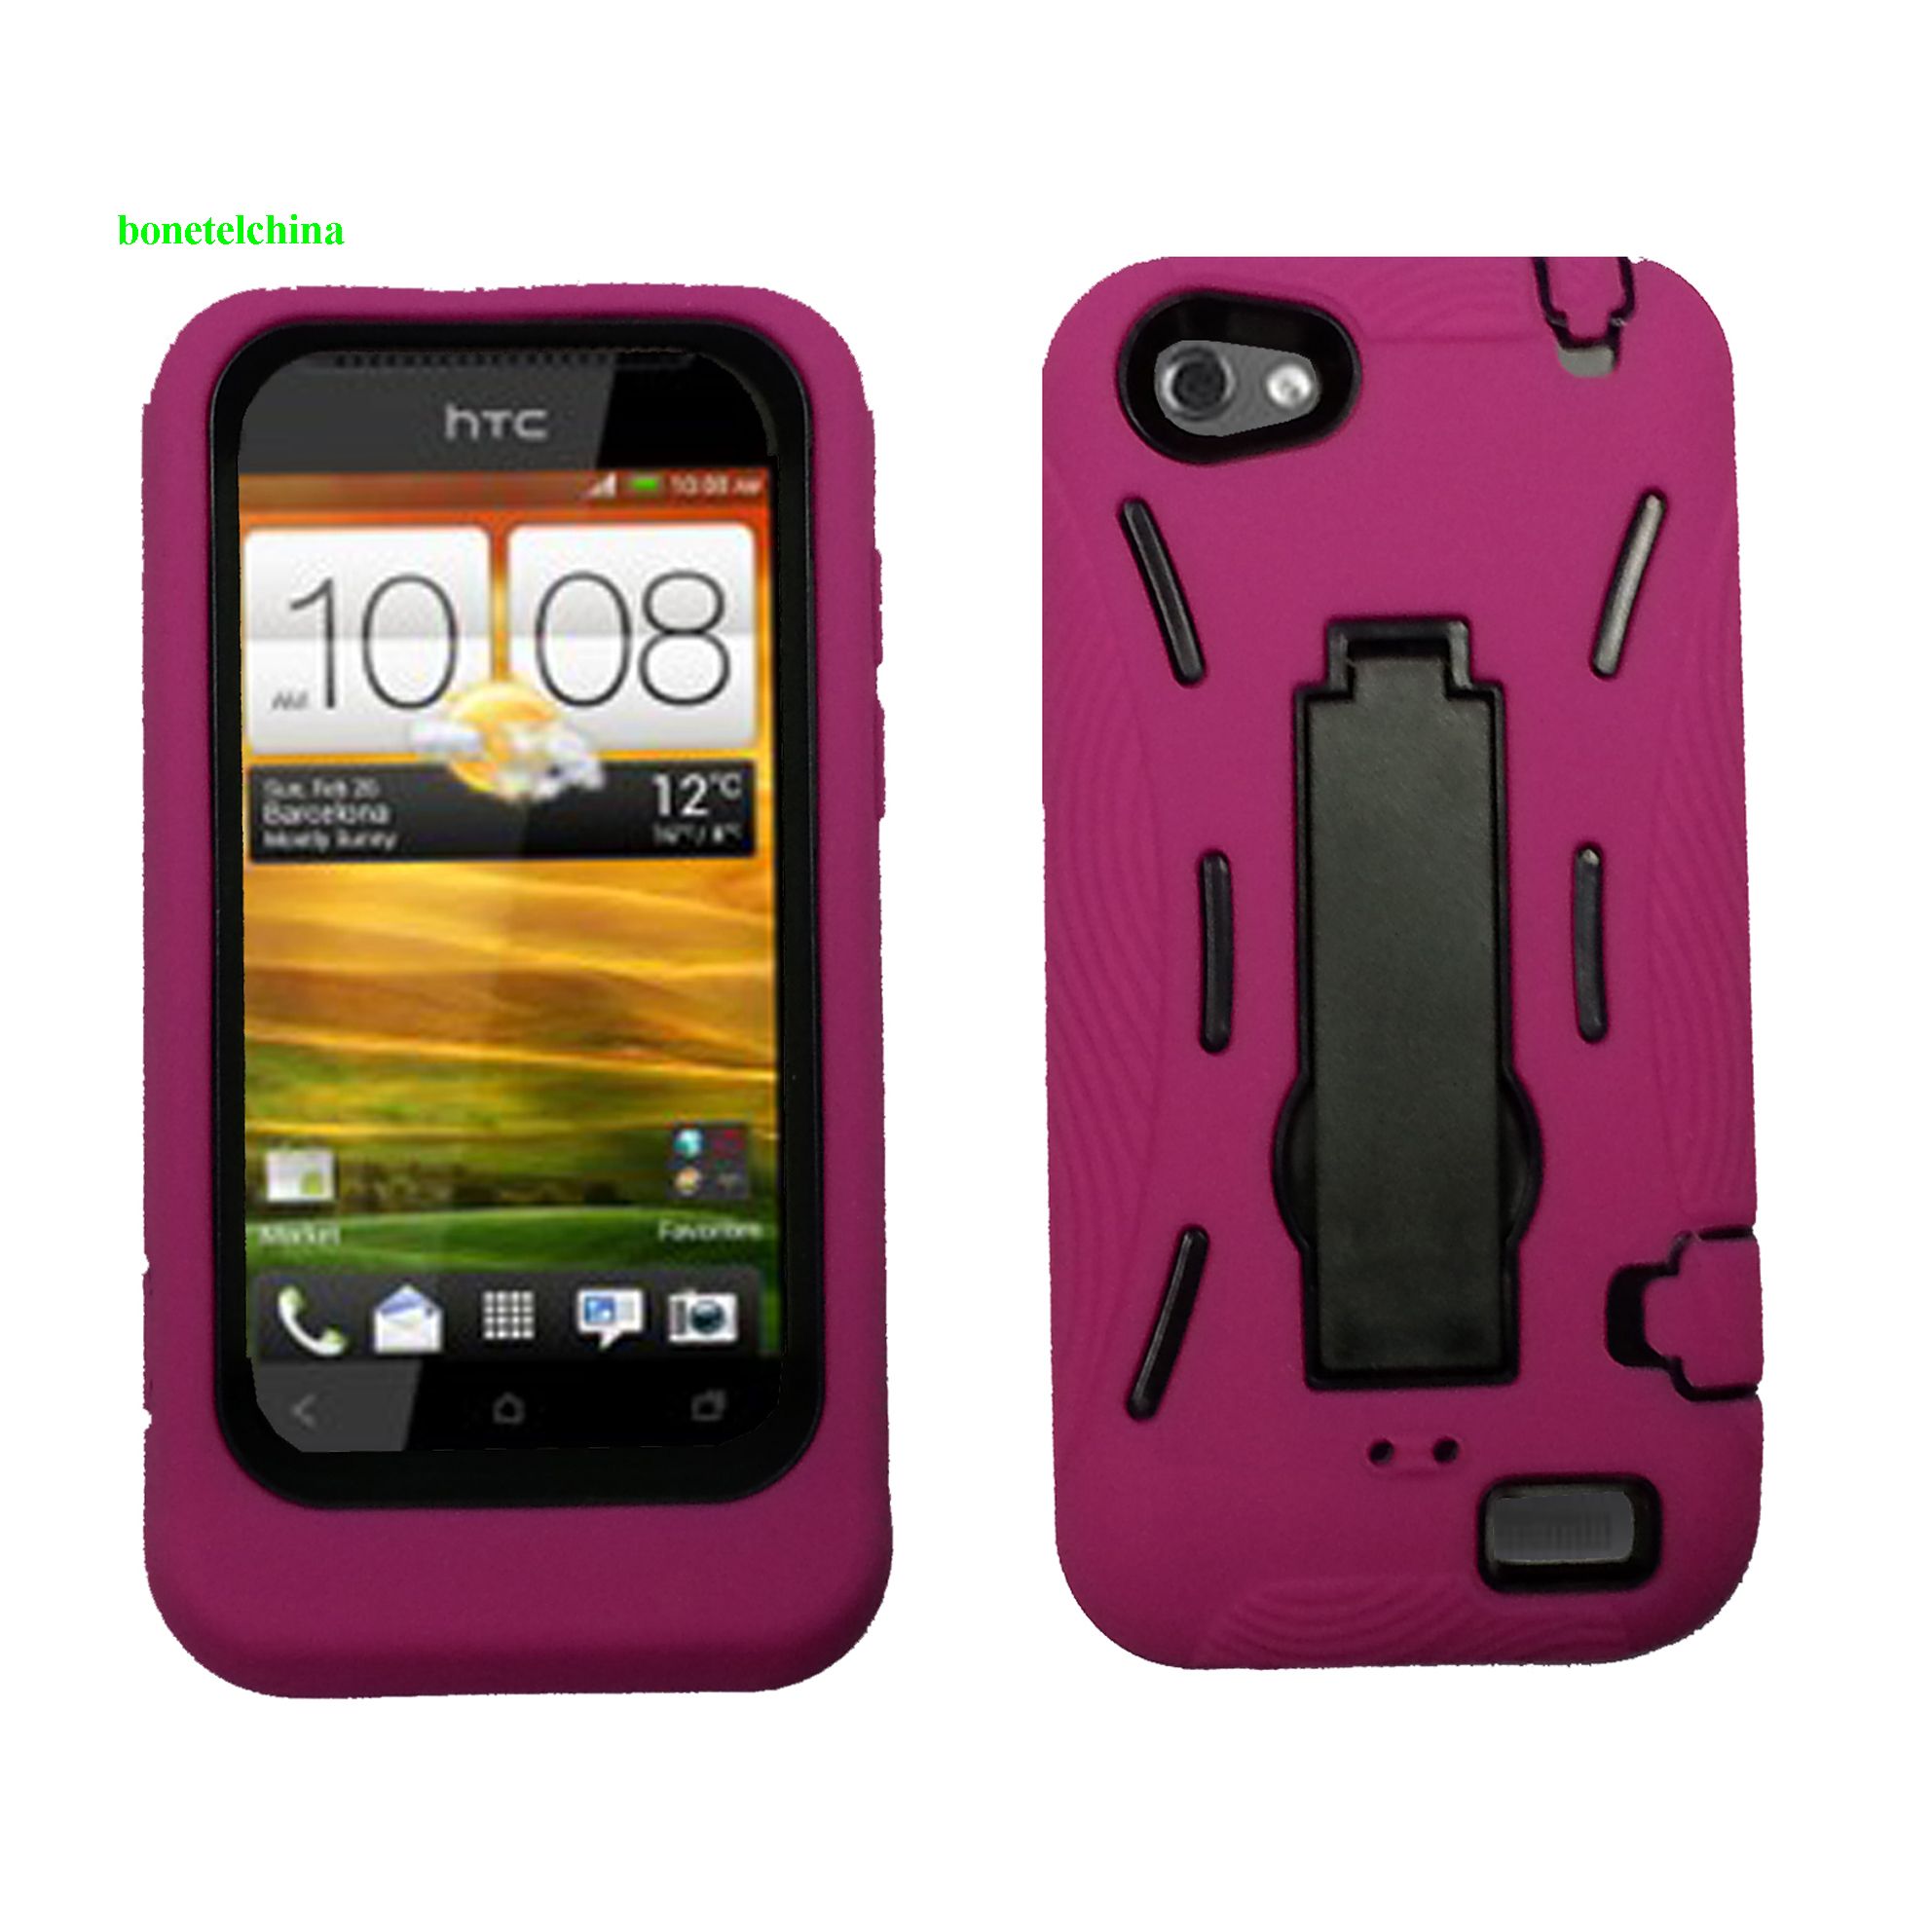 Robot defender case Silicone+PC Anti Impact Hybrid Case Kickstand shell For HTC One V Pink Black